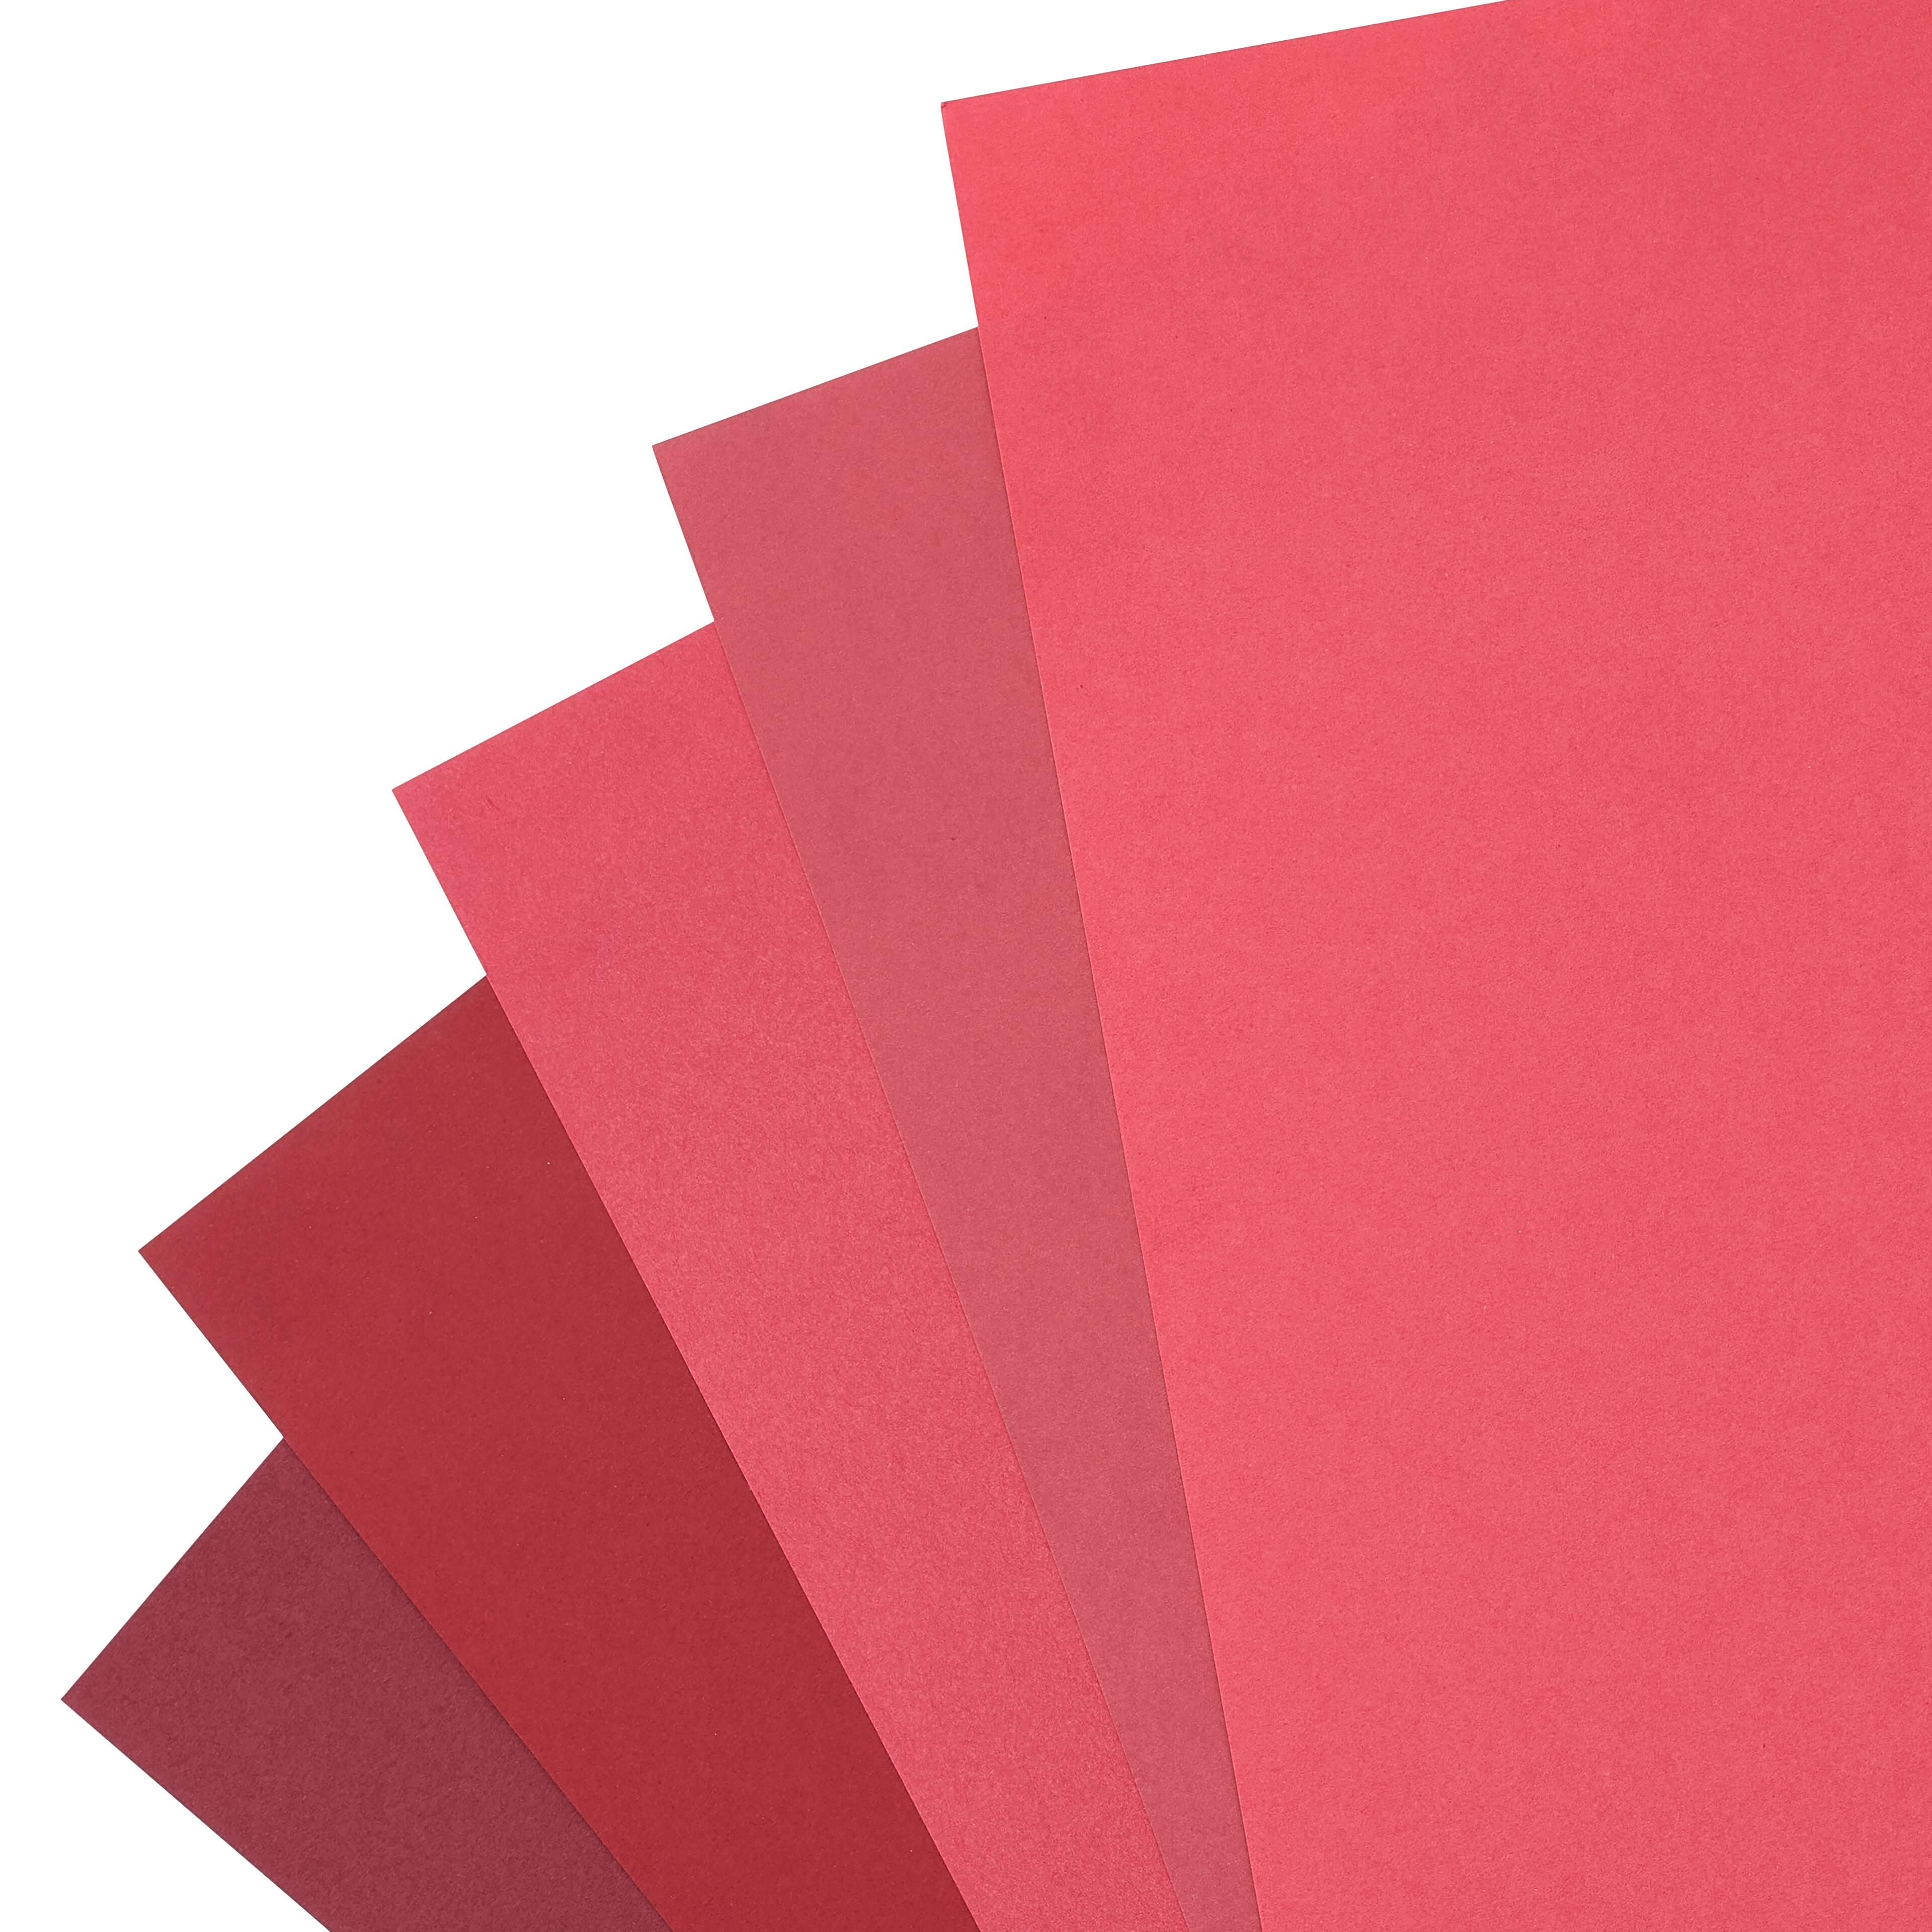 Shades of Red 8.5 x 11 Cardstock Paper by Recollections™, 50 Sheets 